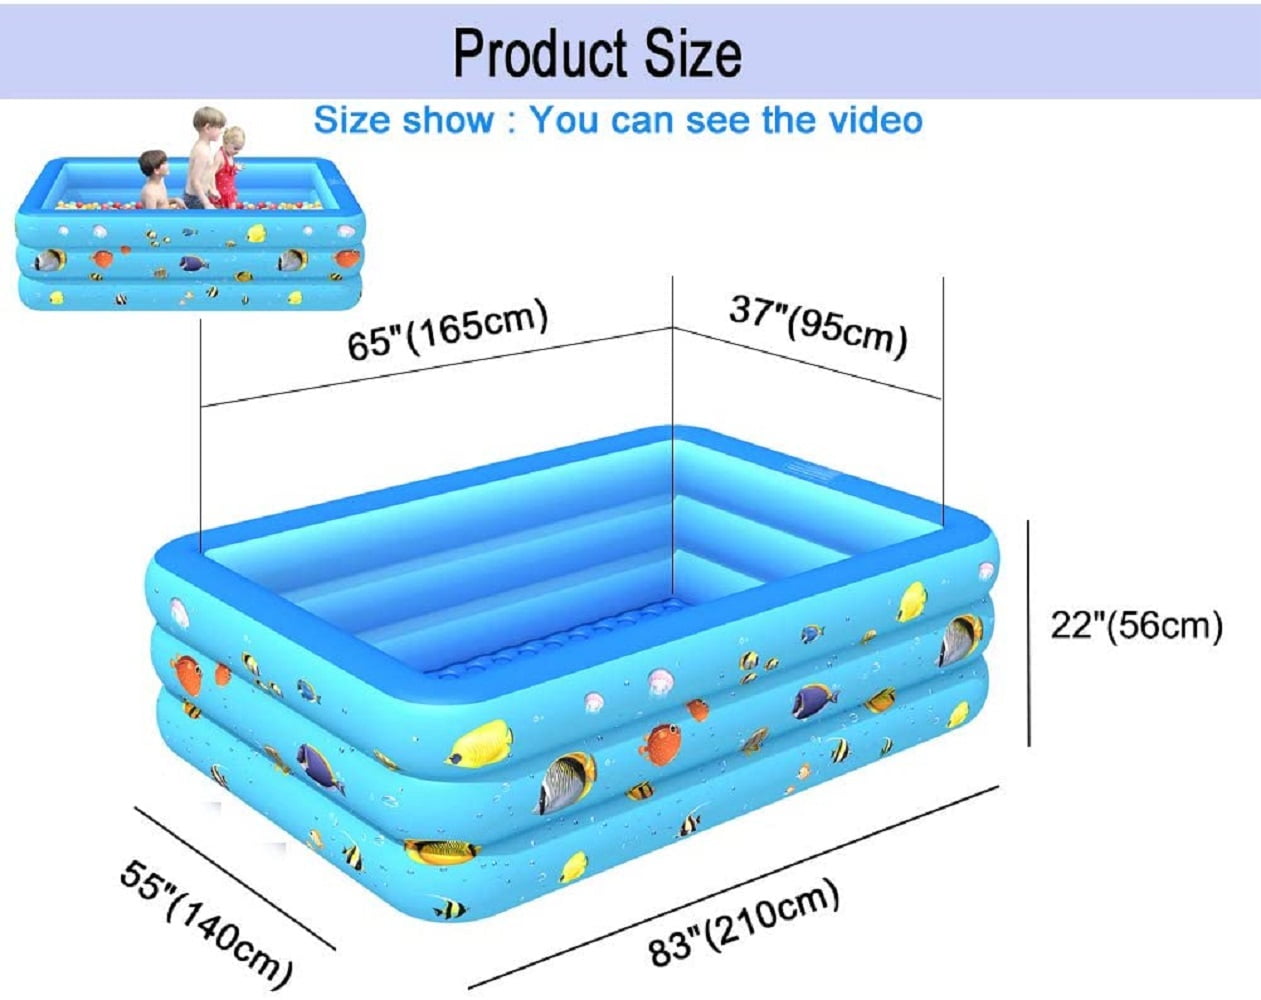 Inflatable Pool, Durable Thickened Blow up Kiddie Pool for Kids, Toddlers and Adults, BPA-Free Family Swimming Pool, 6.9 x 5 x 1.8 ft, Blue